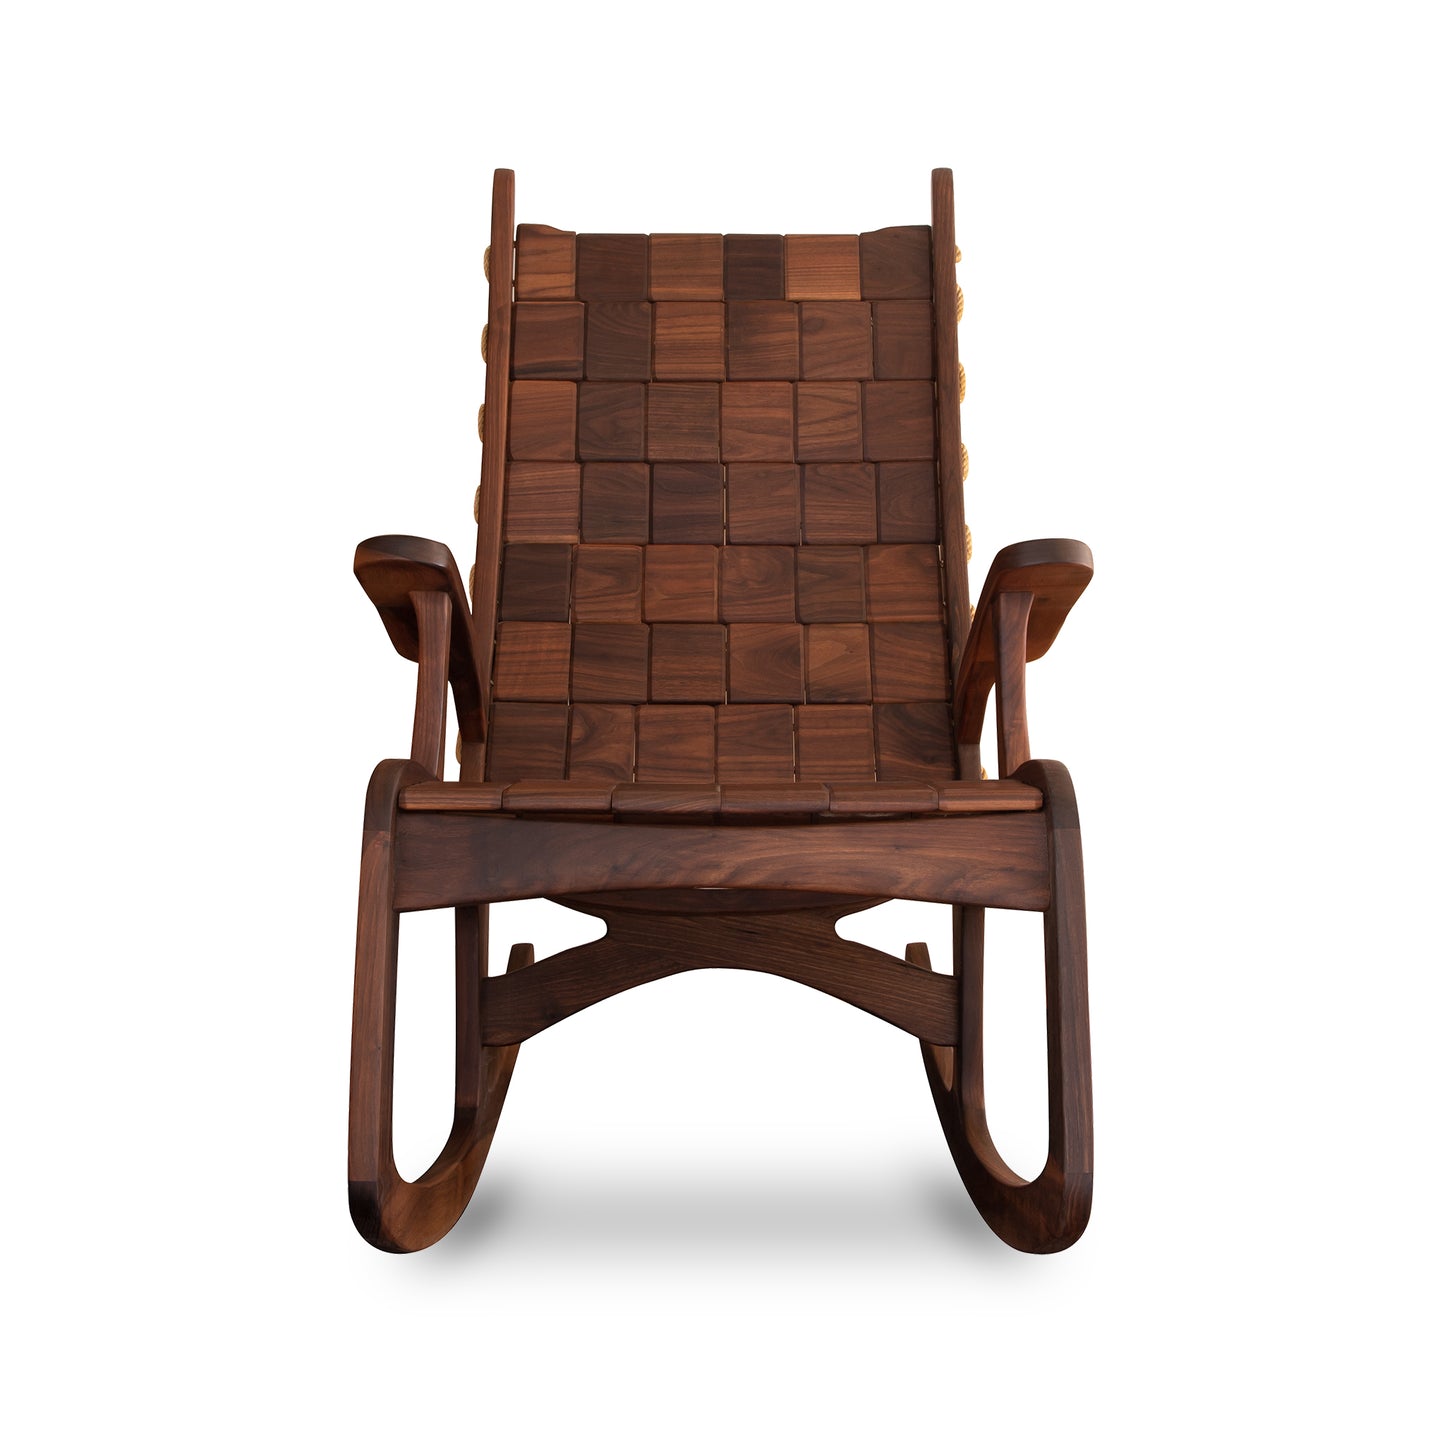 A traditional-style wooden rocking chair with a woven seat and backrest, featuring curved armrests and legs. It is crafted in the Shaker style and is isolated on a white background.